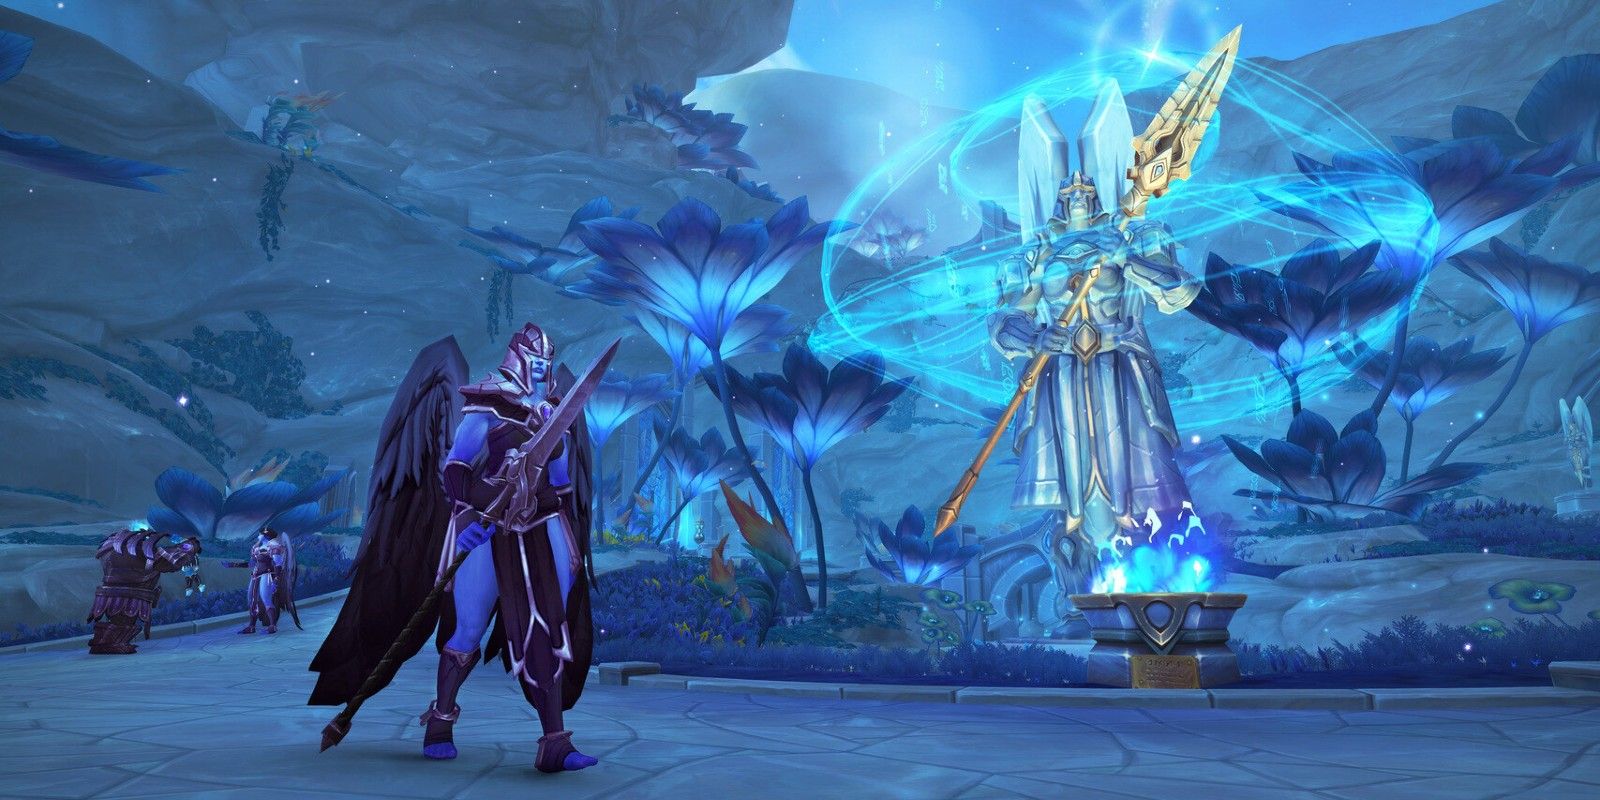 A player confronts an ethereal being in World of Warcraft: Shadowlands